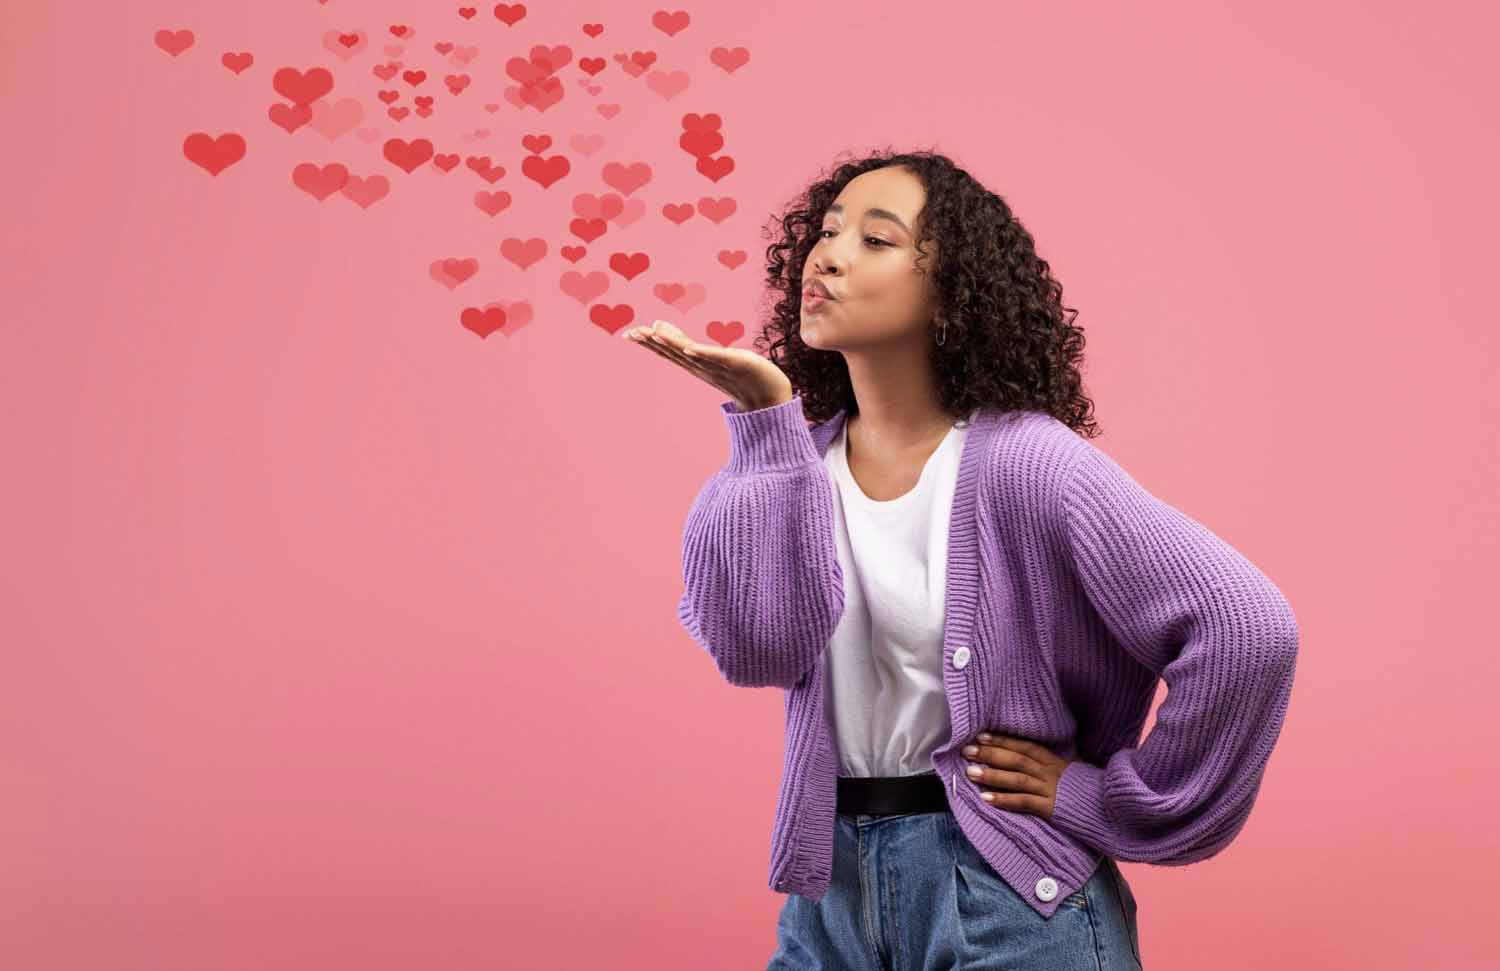 Alt: Young woman blowing air kiss with flying red hearts over pink studio background